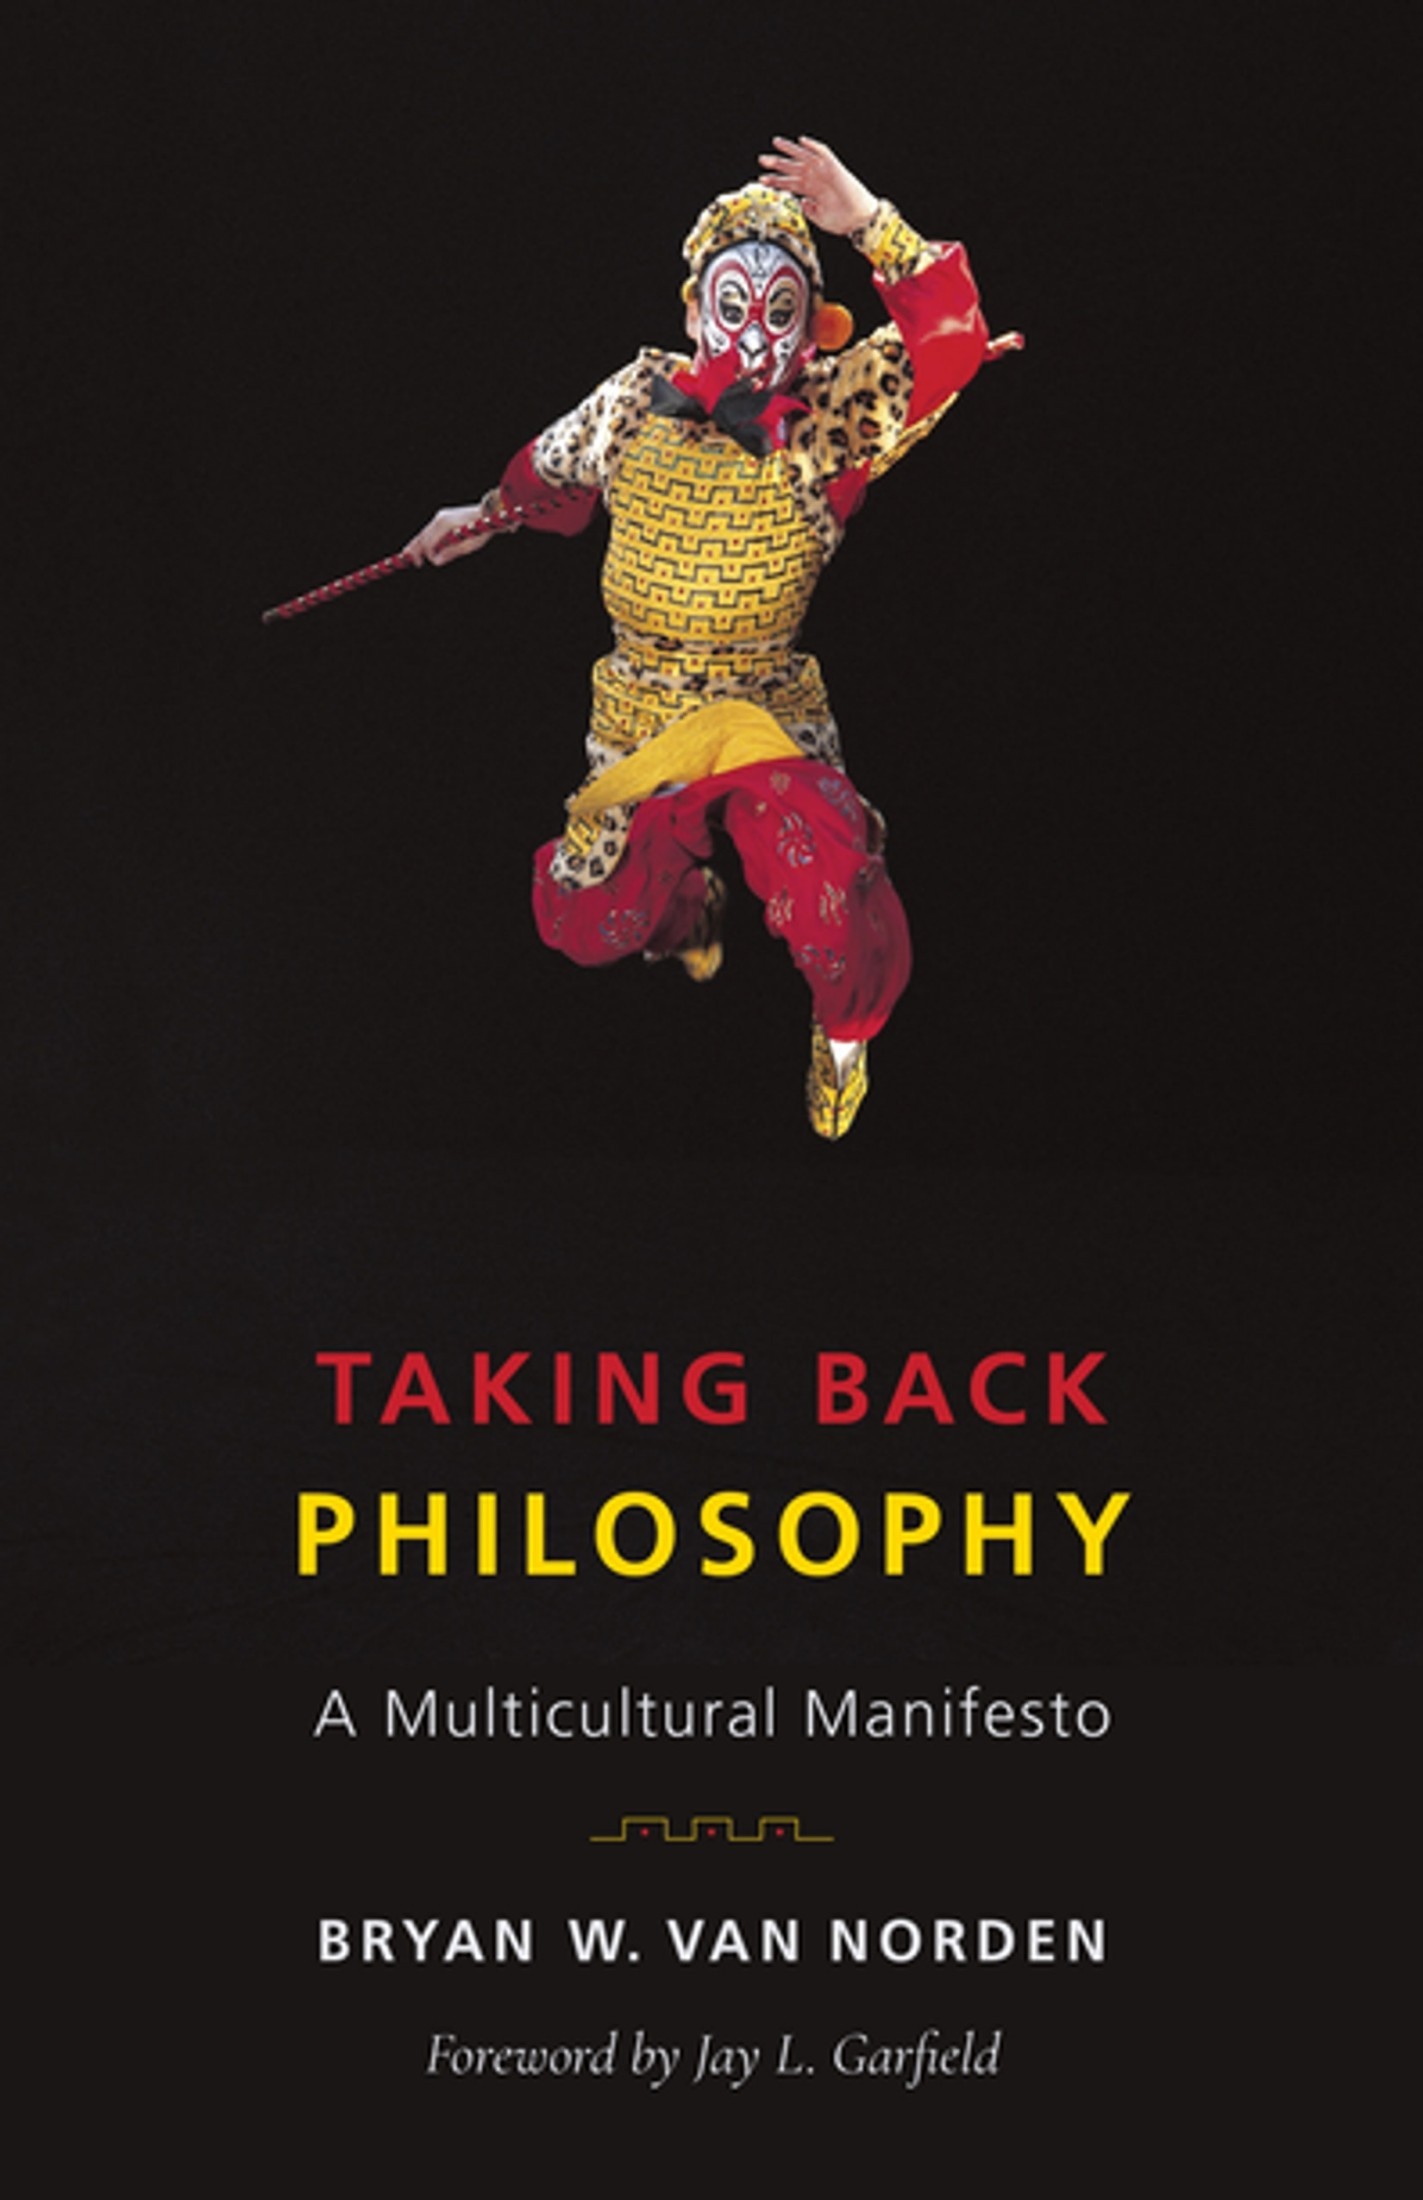 Taking Back Philosophy: A Multicultural Manifesto